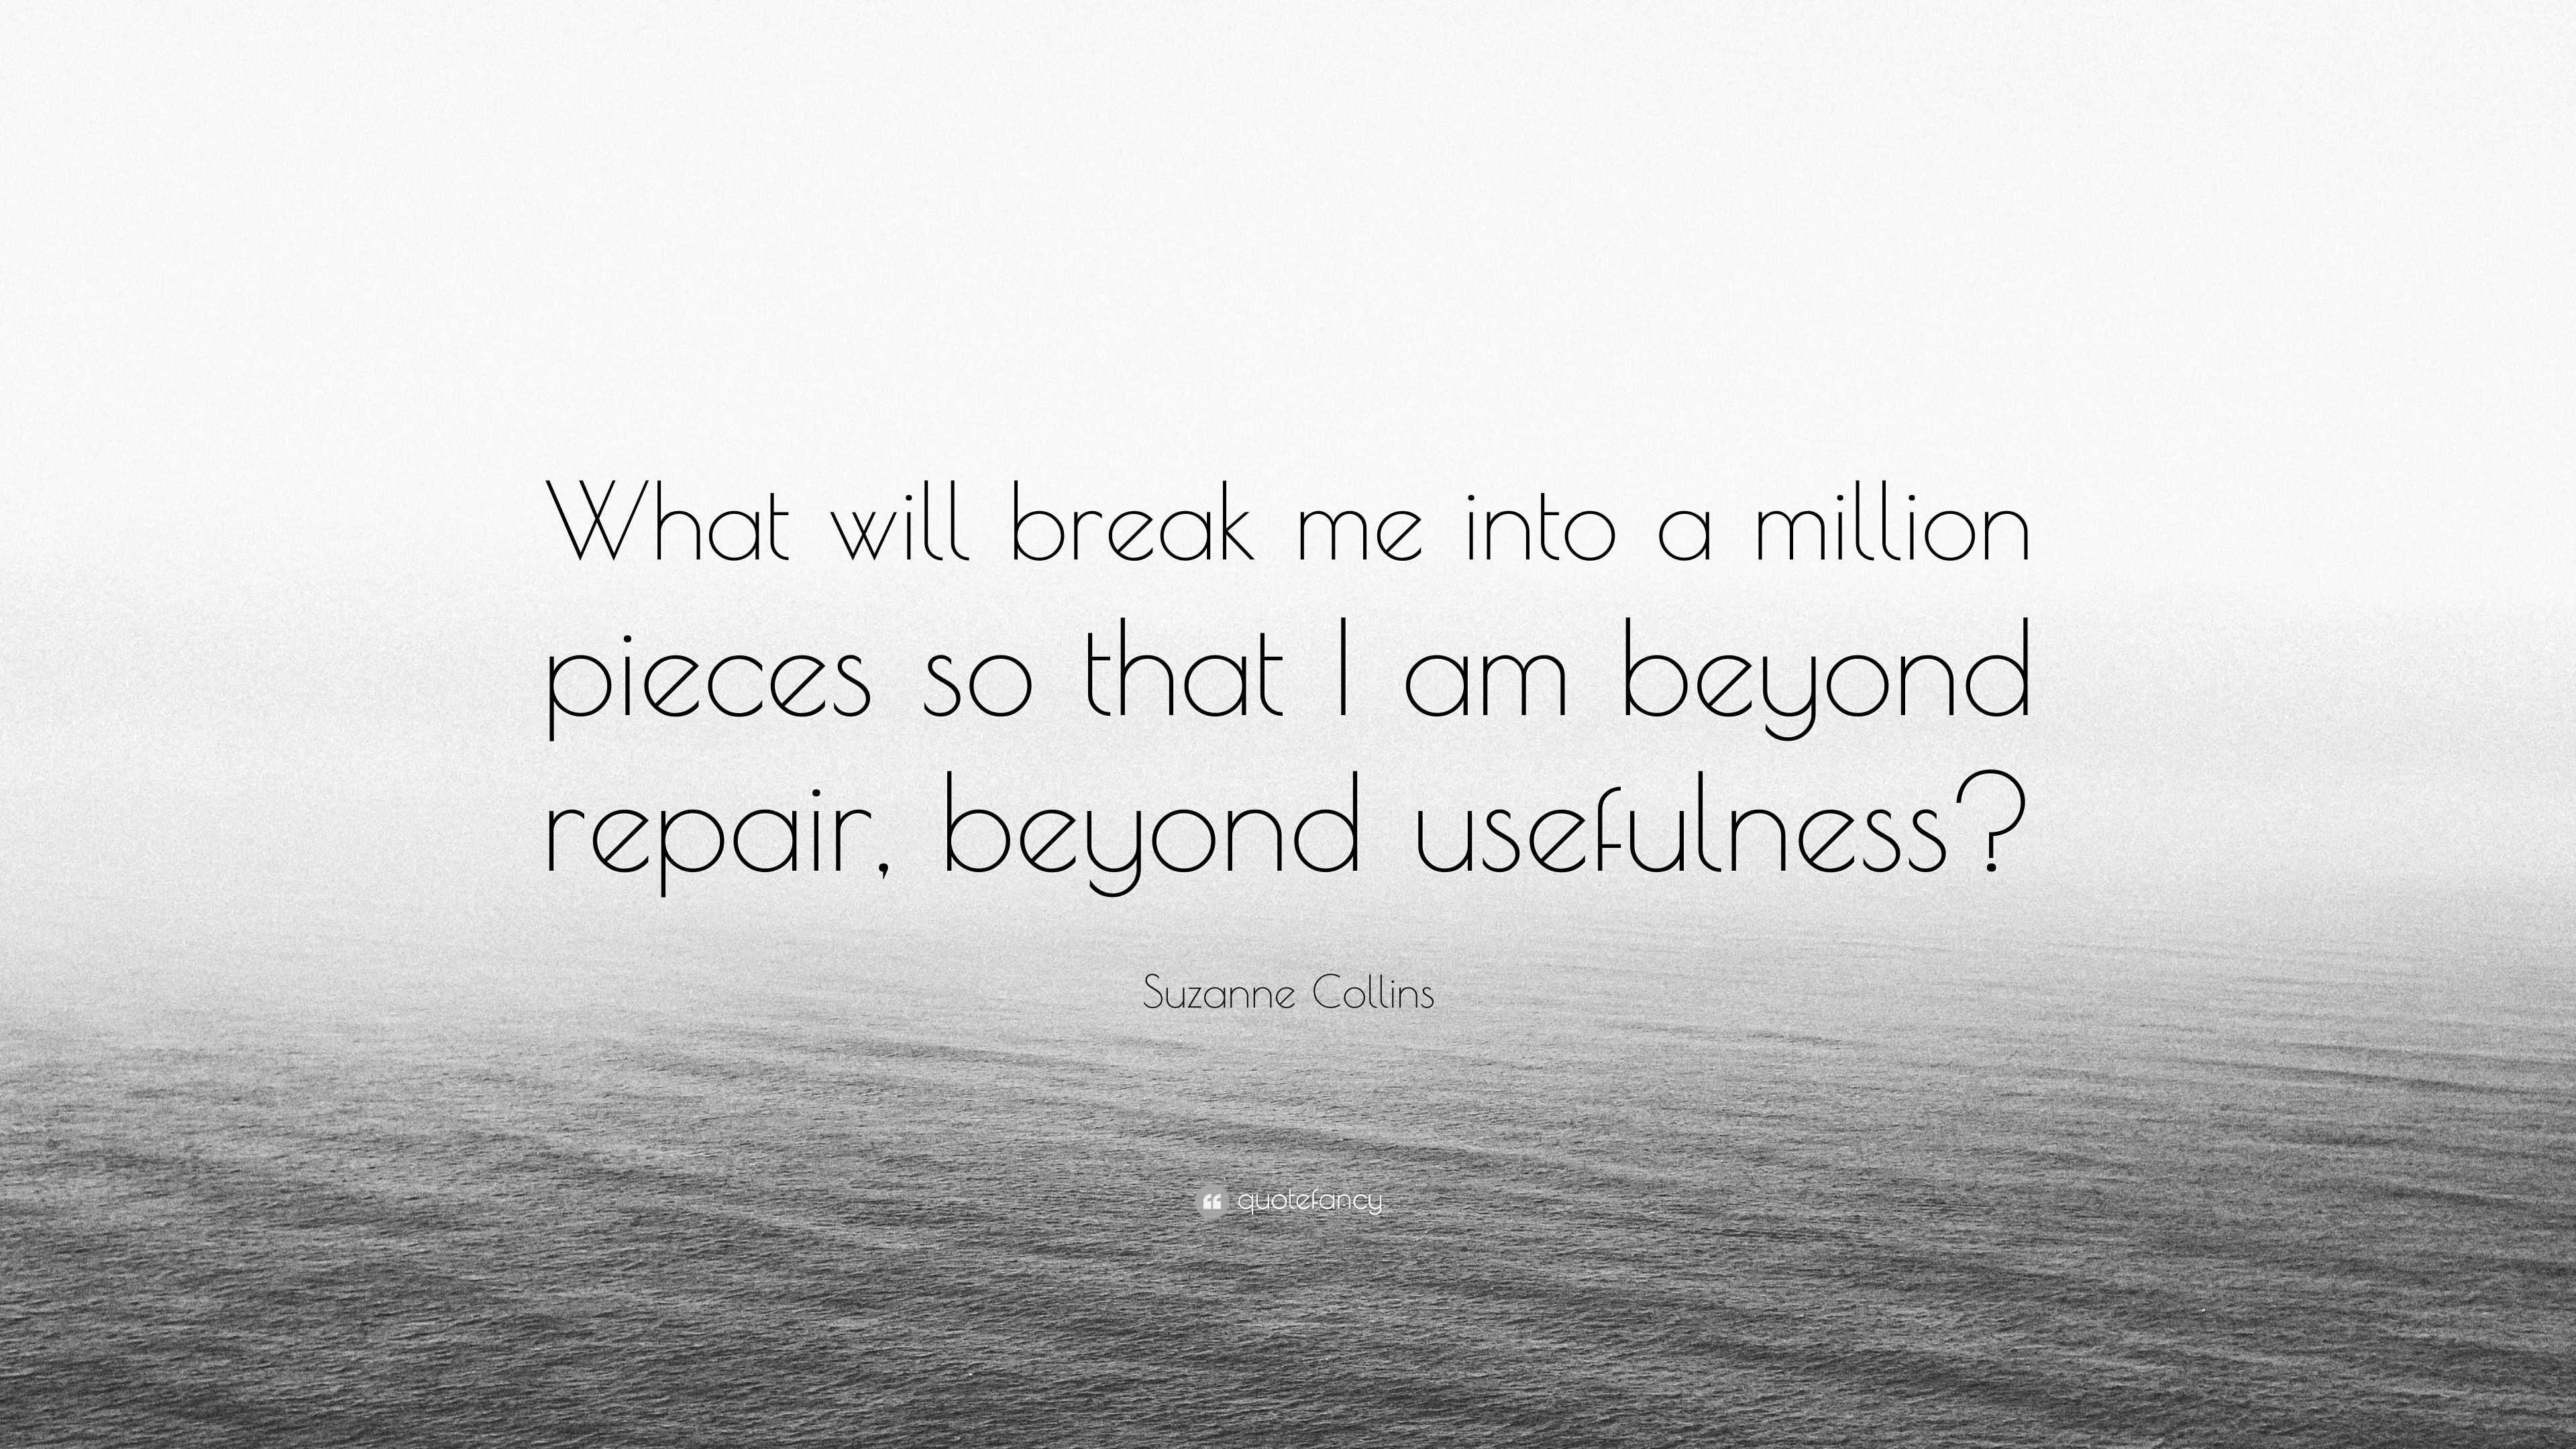 Suzanne Collins Quote What Will Break Me Into A Million Pieces So That I Am Beyond